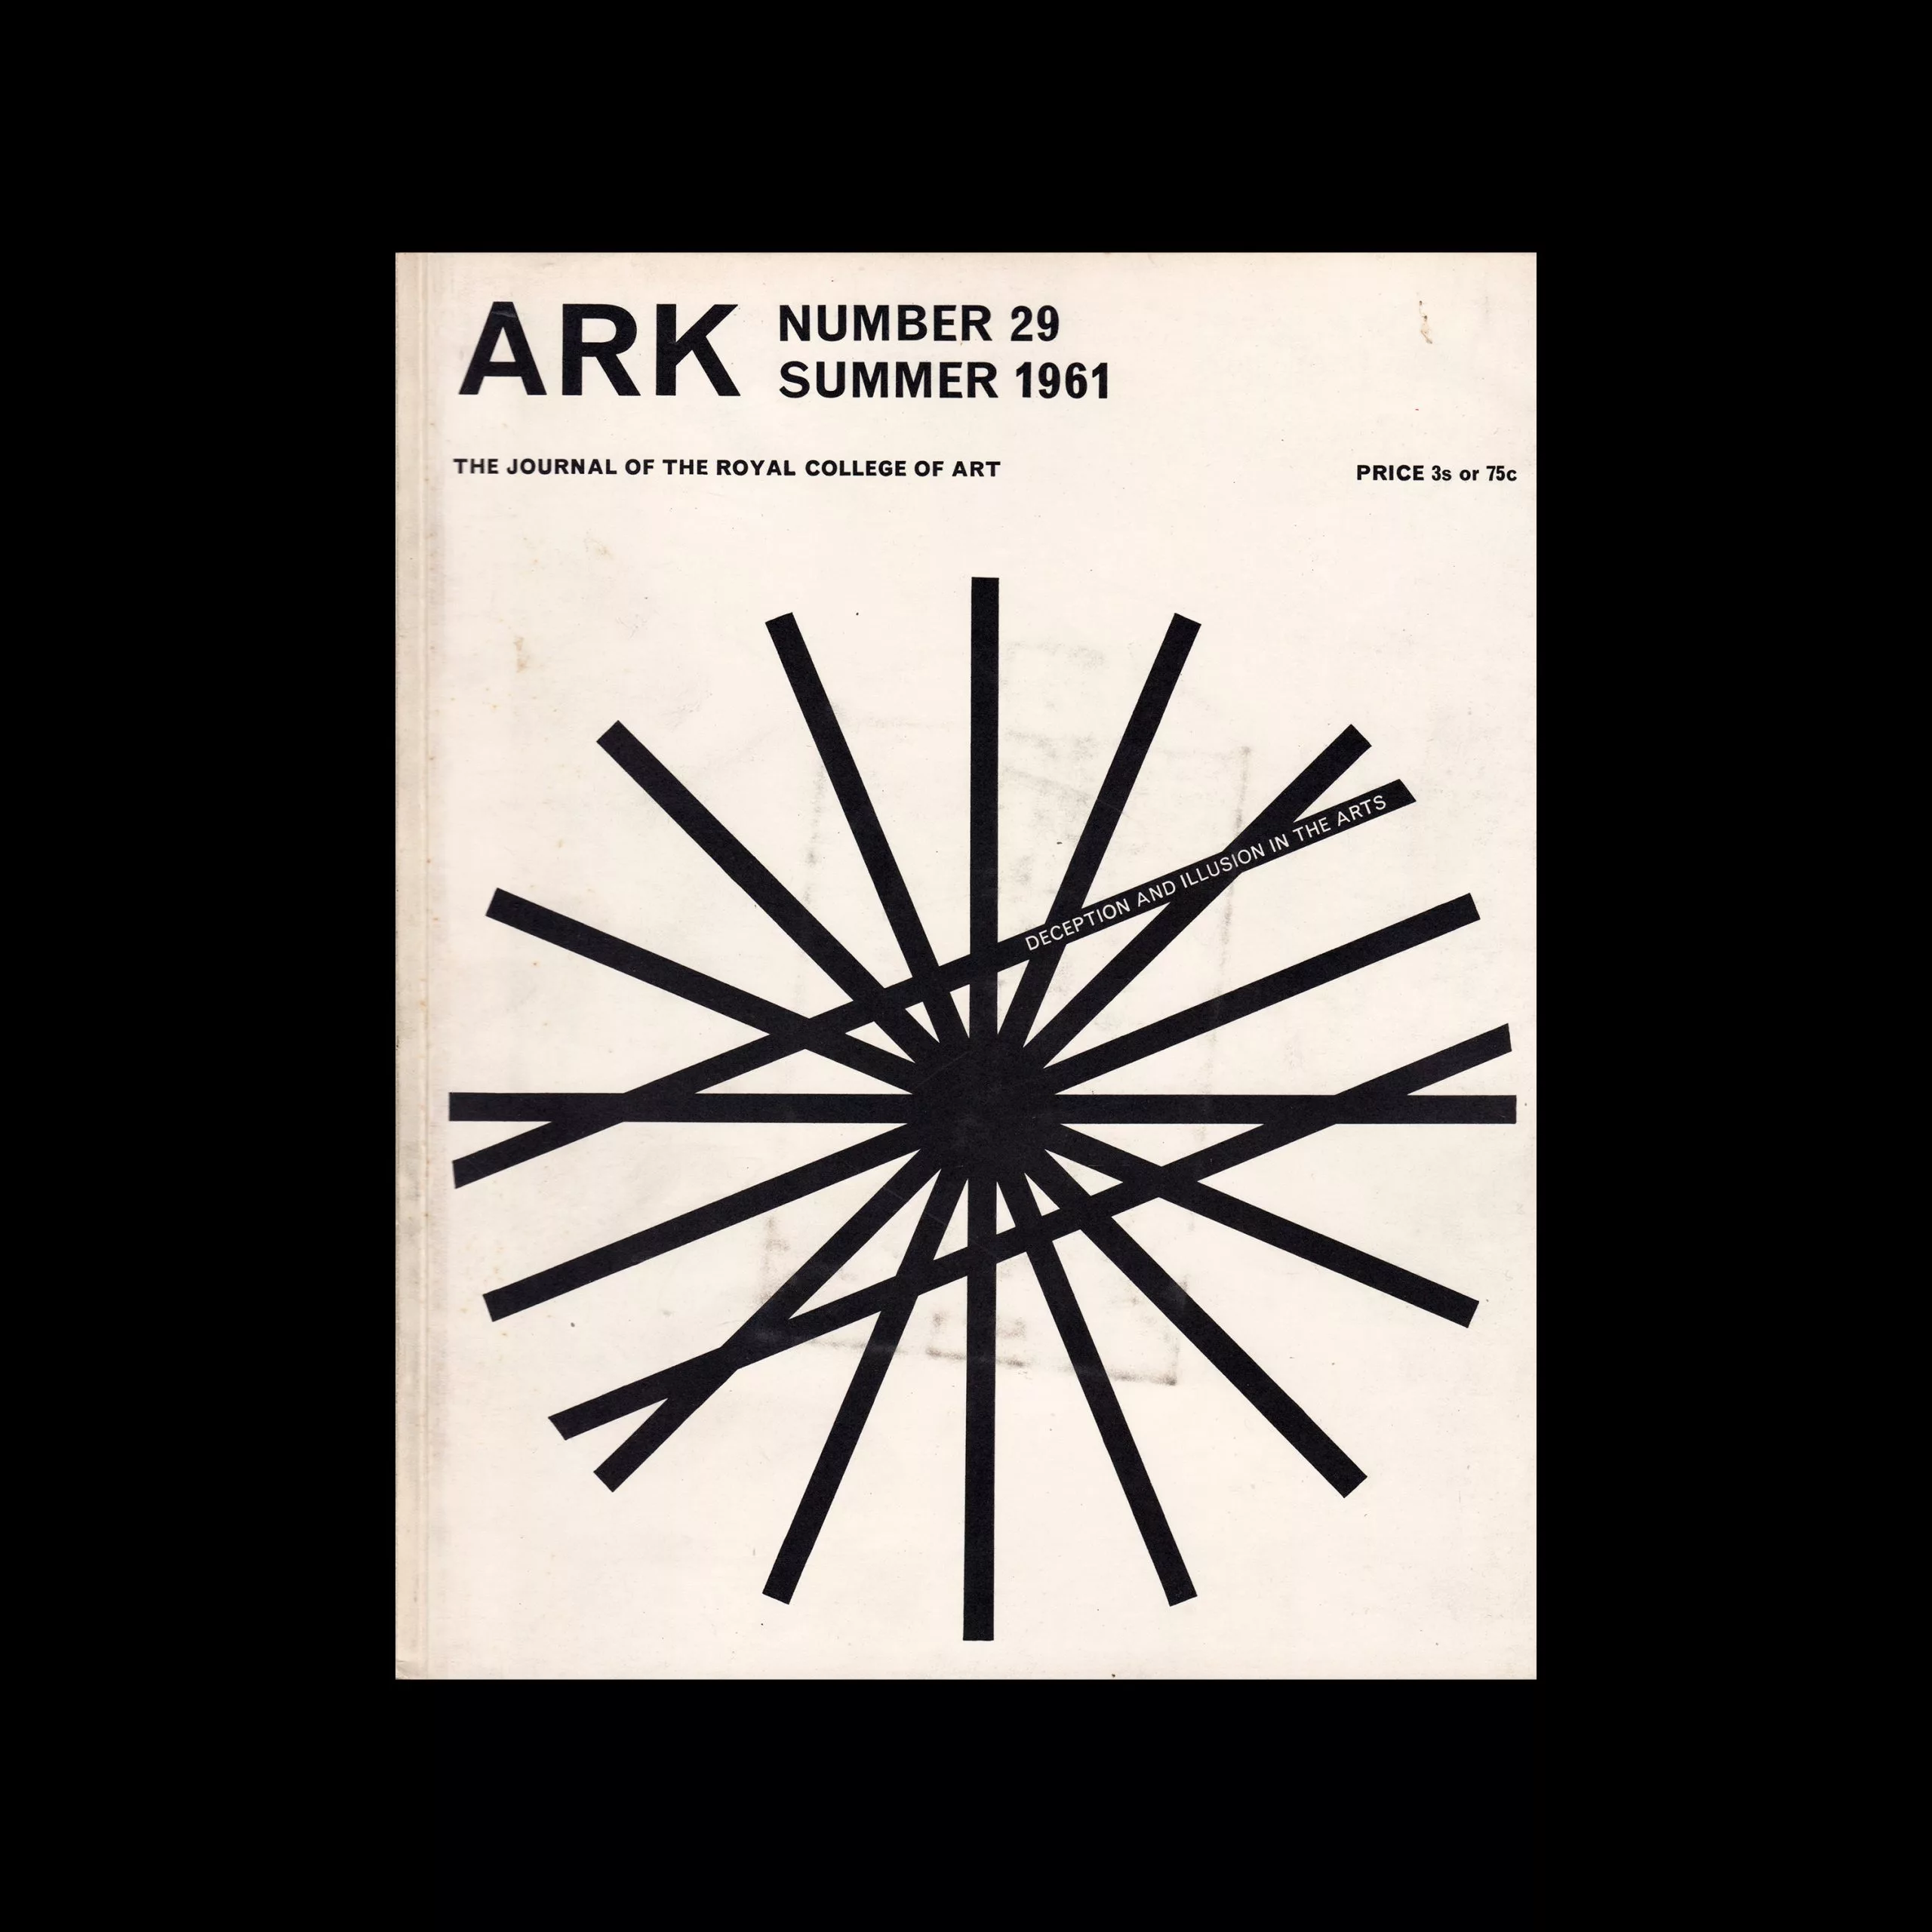 Ark. Number 29, Journal of the Royal College of Art, Summer 1961.